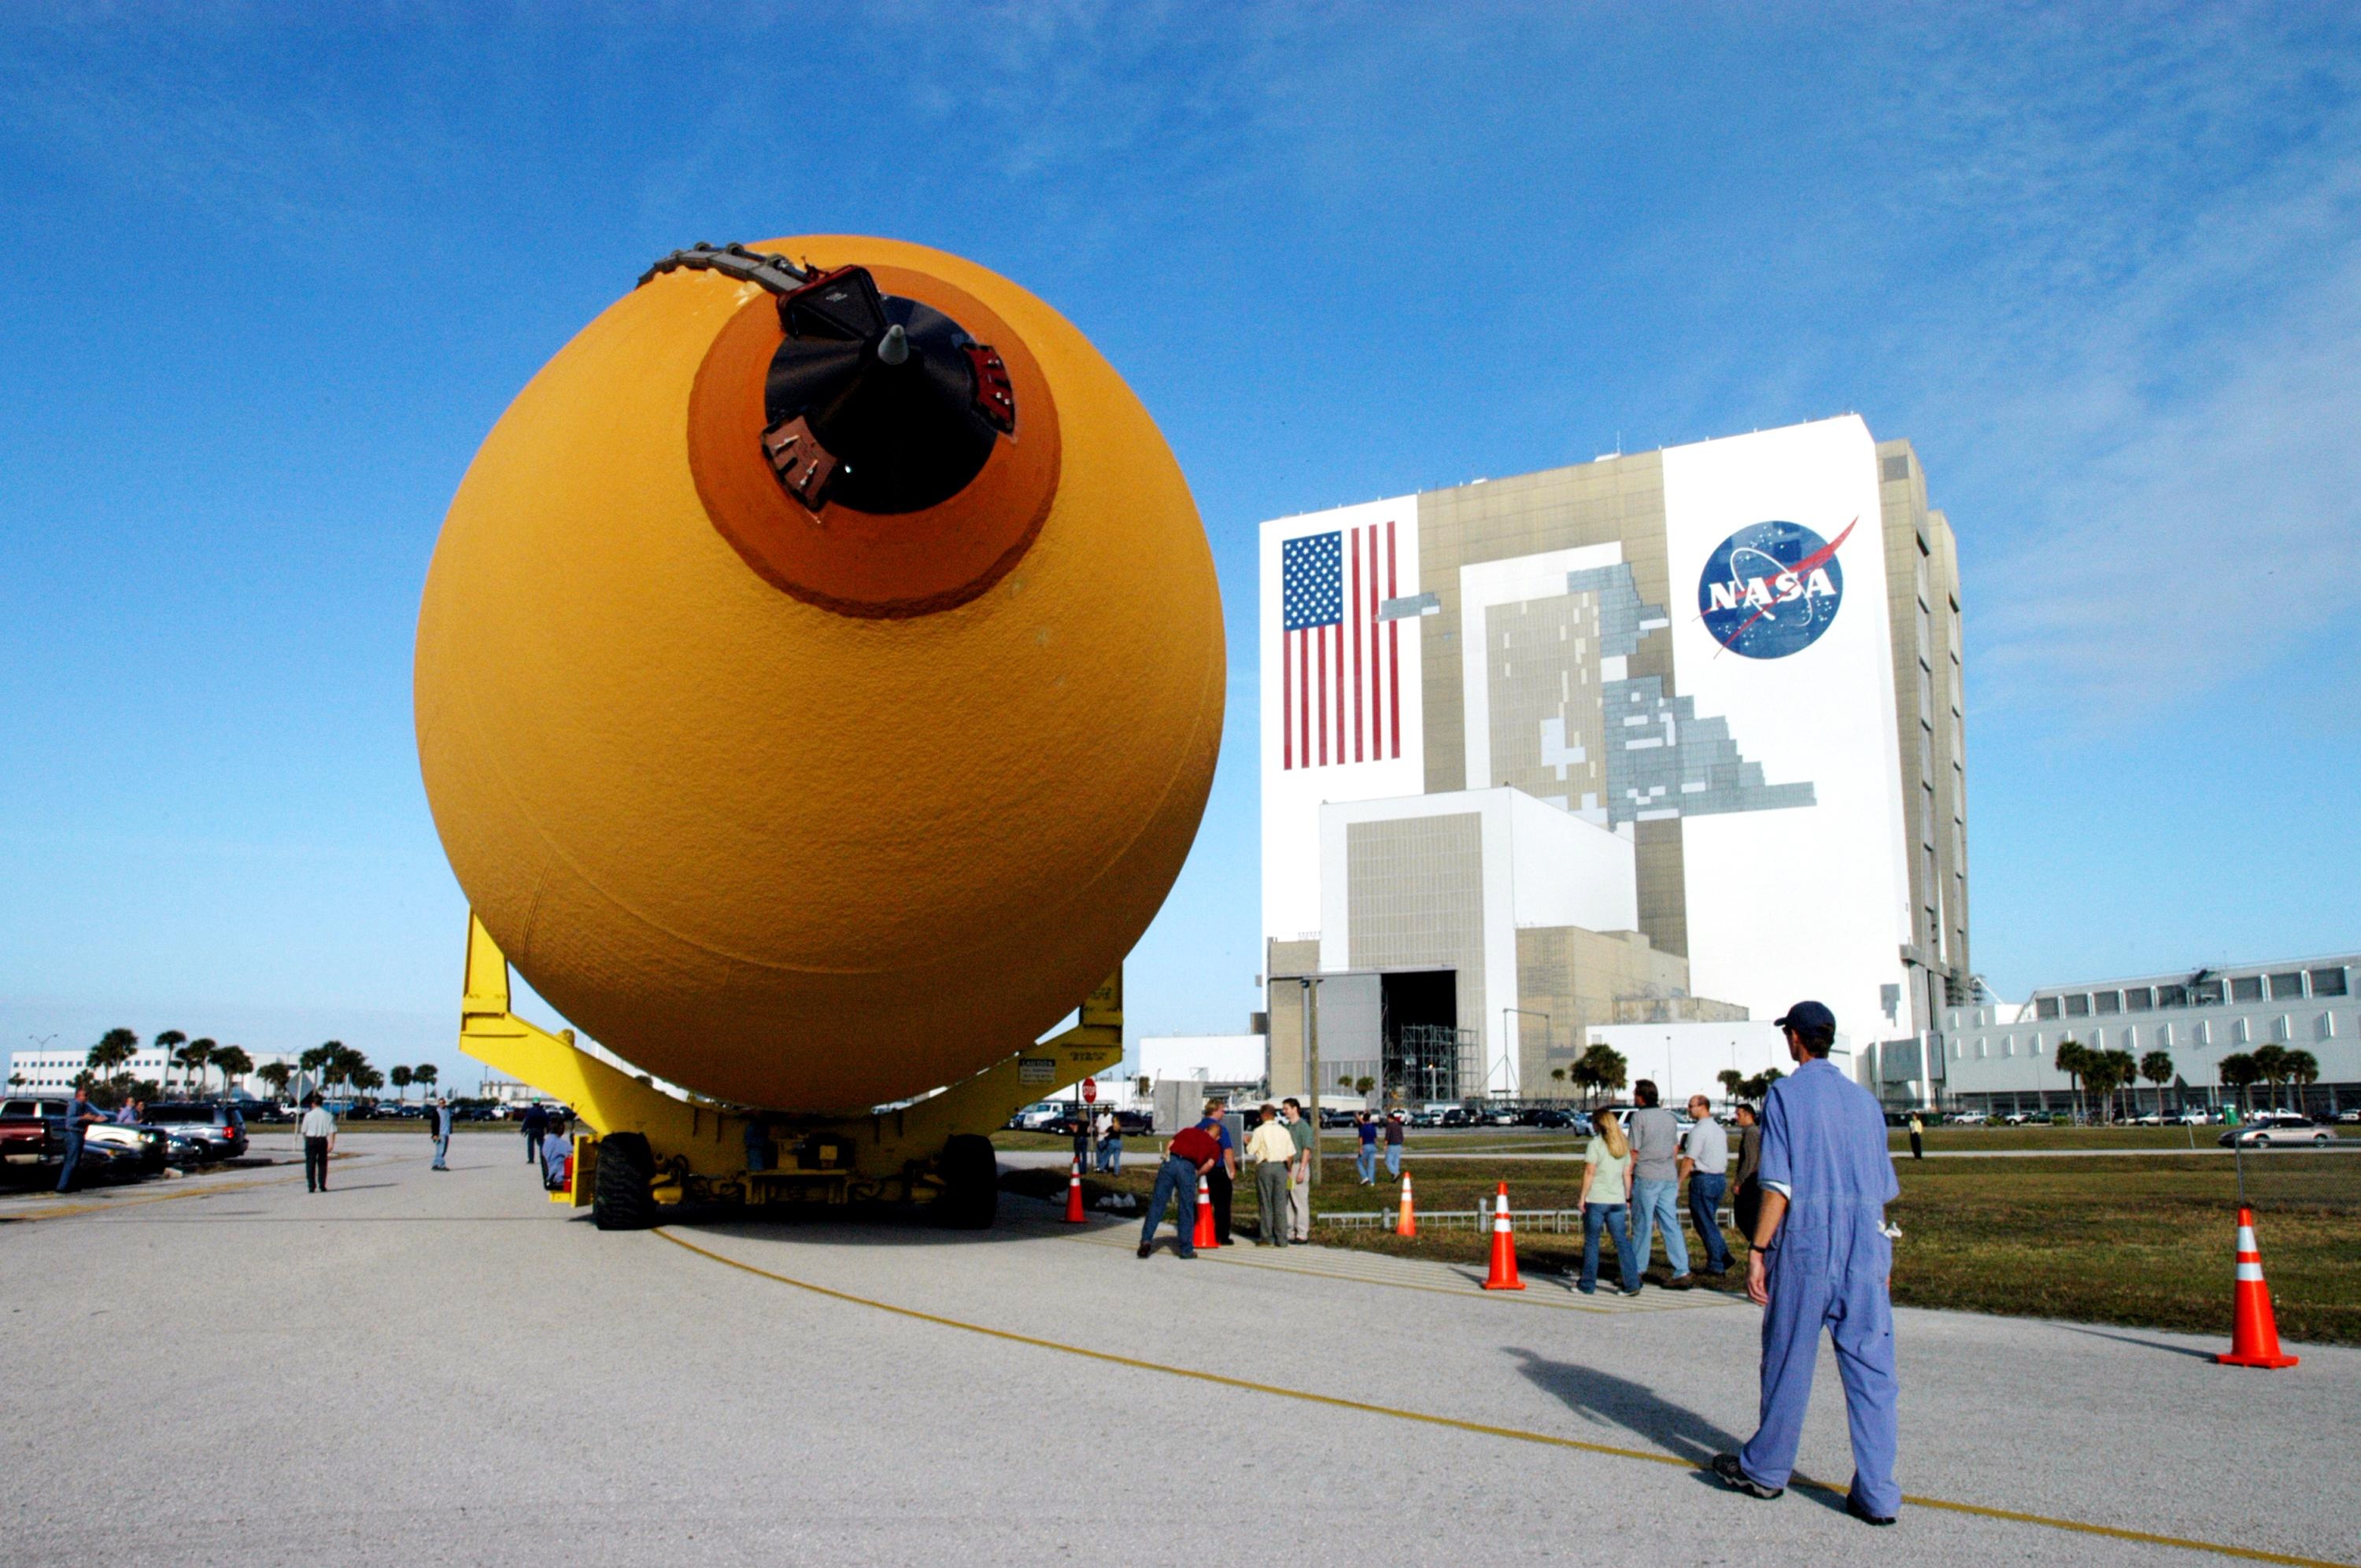 The External Tank (ET) for STS-114 arrives at the Kennedy Space Center (KSC) on 6 January 2005. It would later be substituted for the tank originally earmarked for the second Return to Flight (RTF) mission, STS-121. Photo Credit: NASA